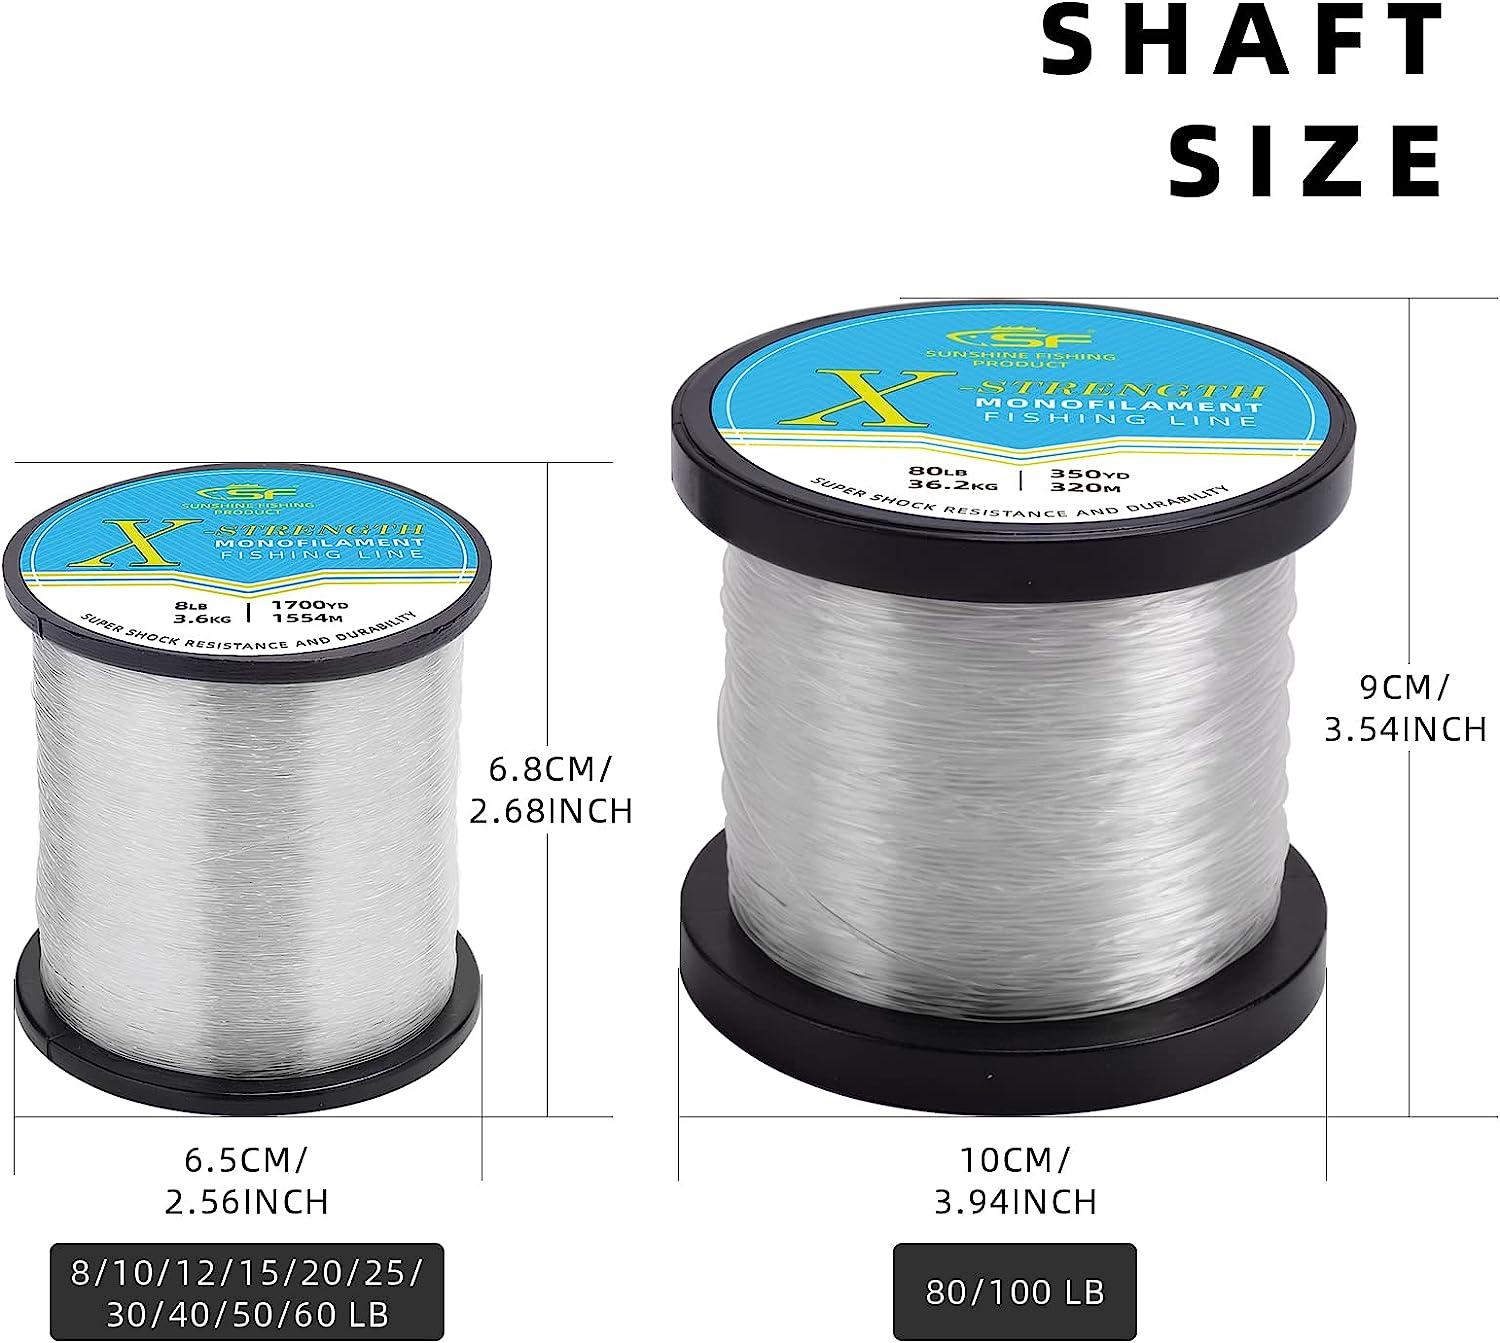 SF Monofilament Fishing Line with Spool Strong Mono Nylon Leader Line 8/10/12/15/20/25/30/40/50/60/80/100LB  Clear/Green Fishing Wire Saltwater Freshwater for Hanging Decorations  Sewing Craft Balloons Clear 30LB/0.55mm/440Yds